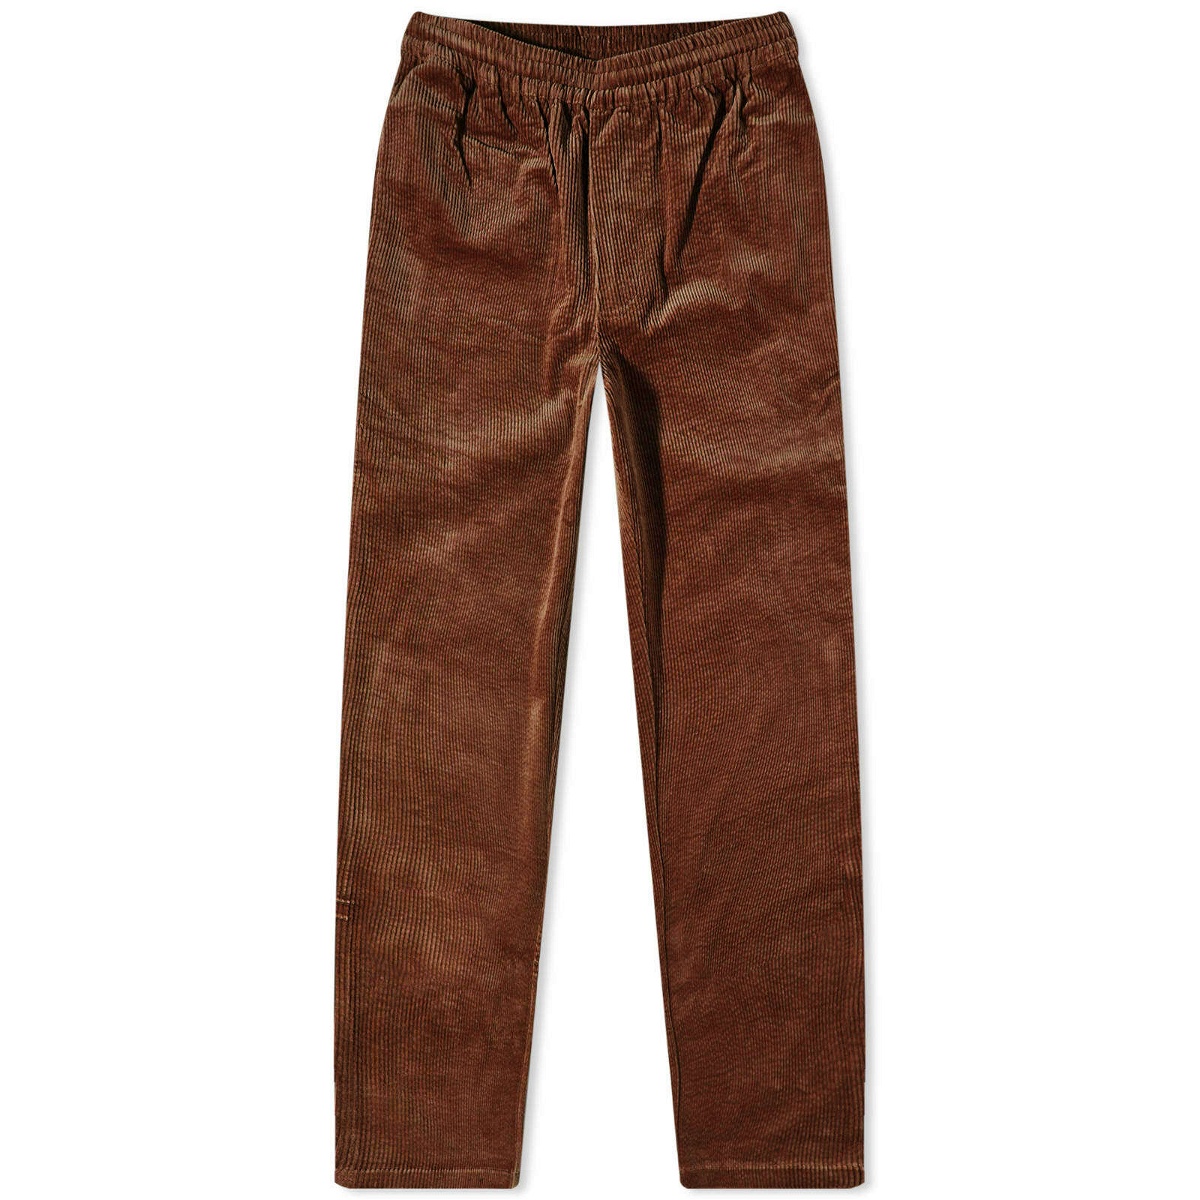 Grand Collection Cord Pant in Brown Grand Collection